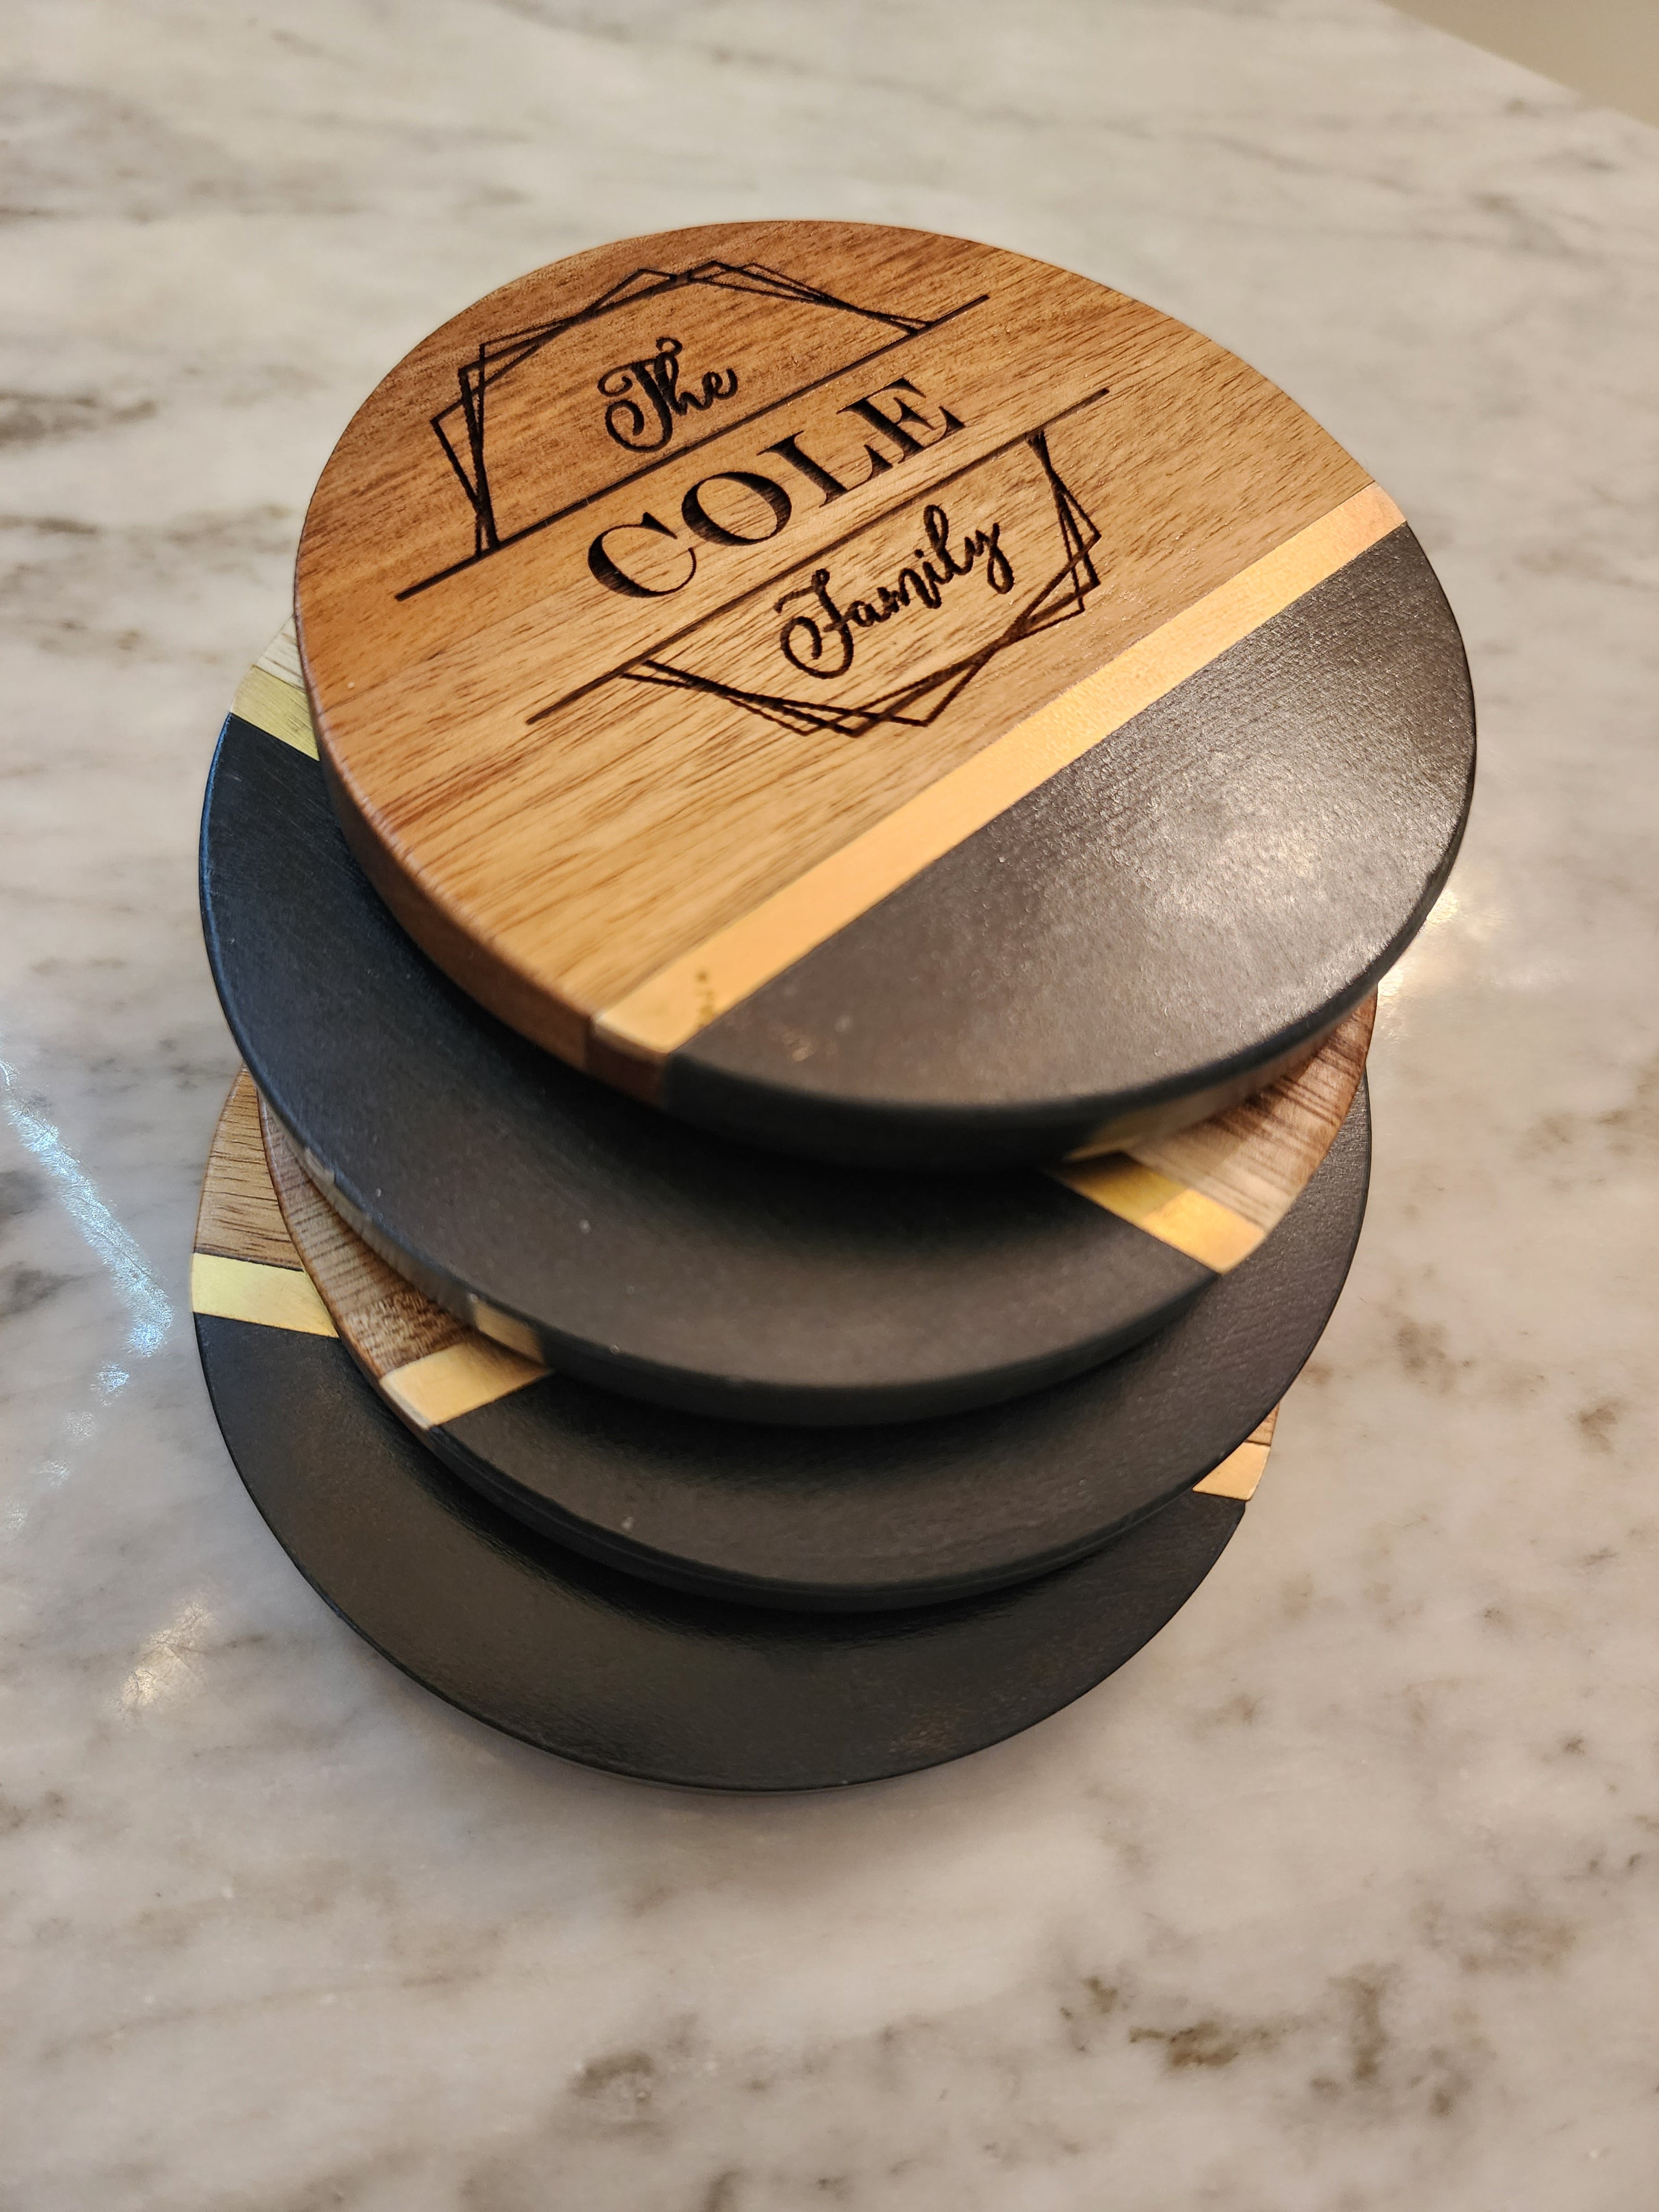 Personalized Rustic Wood Coaster Set